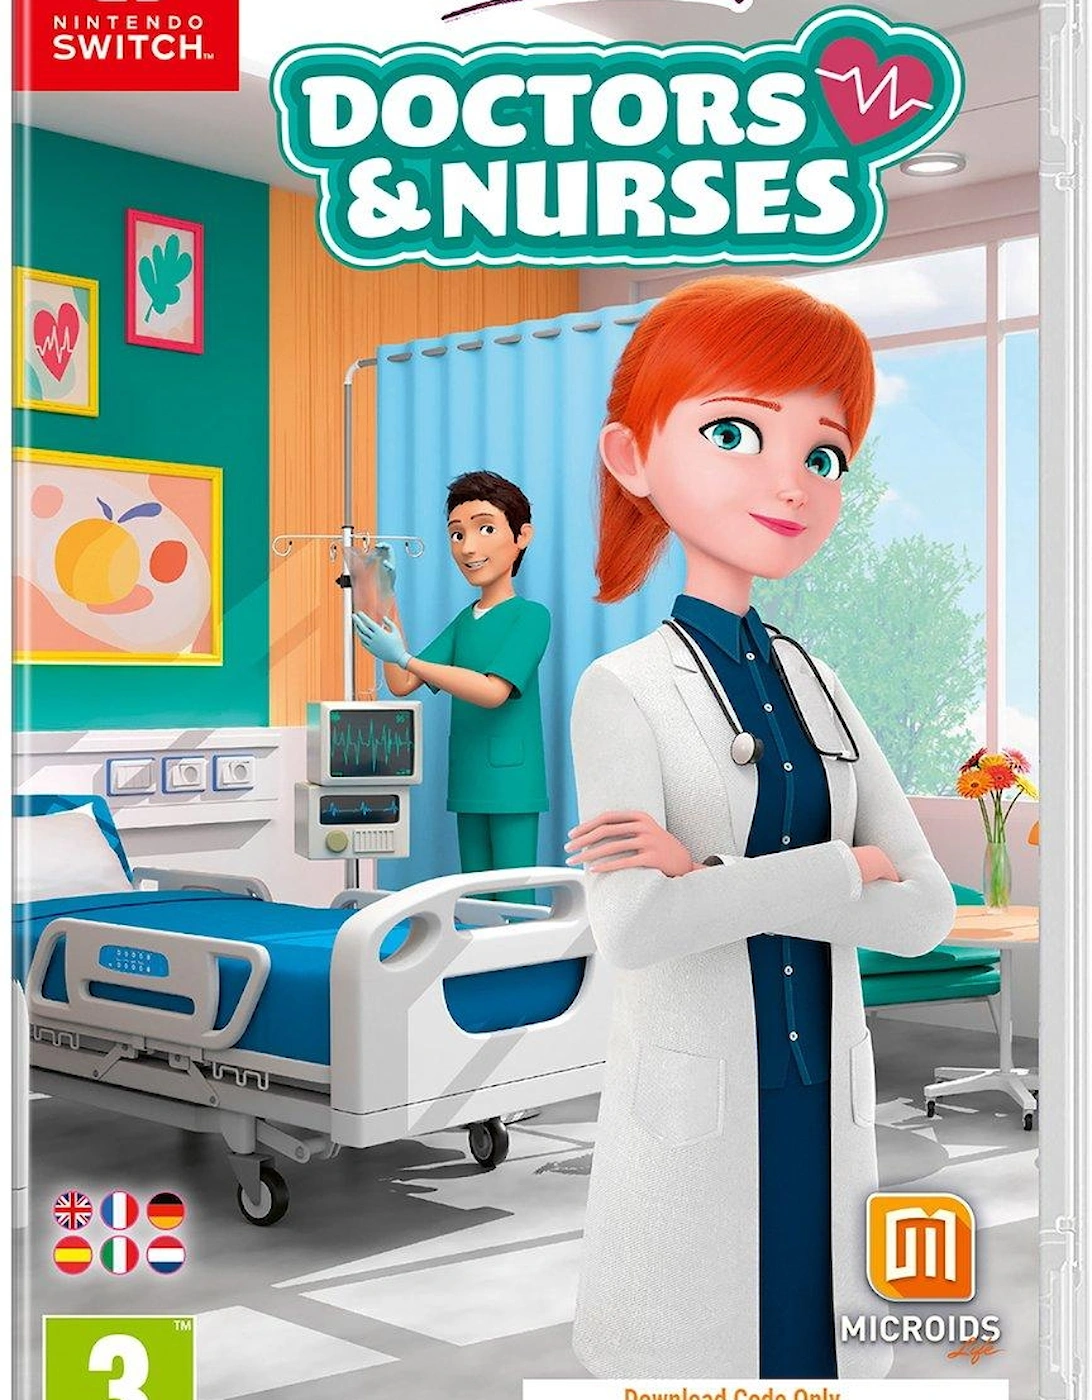 Switch My Universe: Doctors and Nurses, 2 of 1